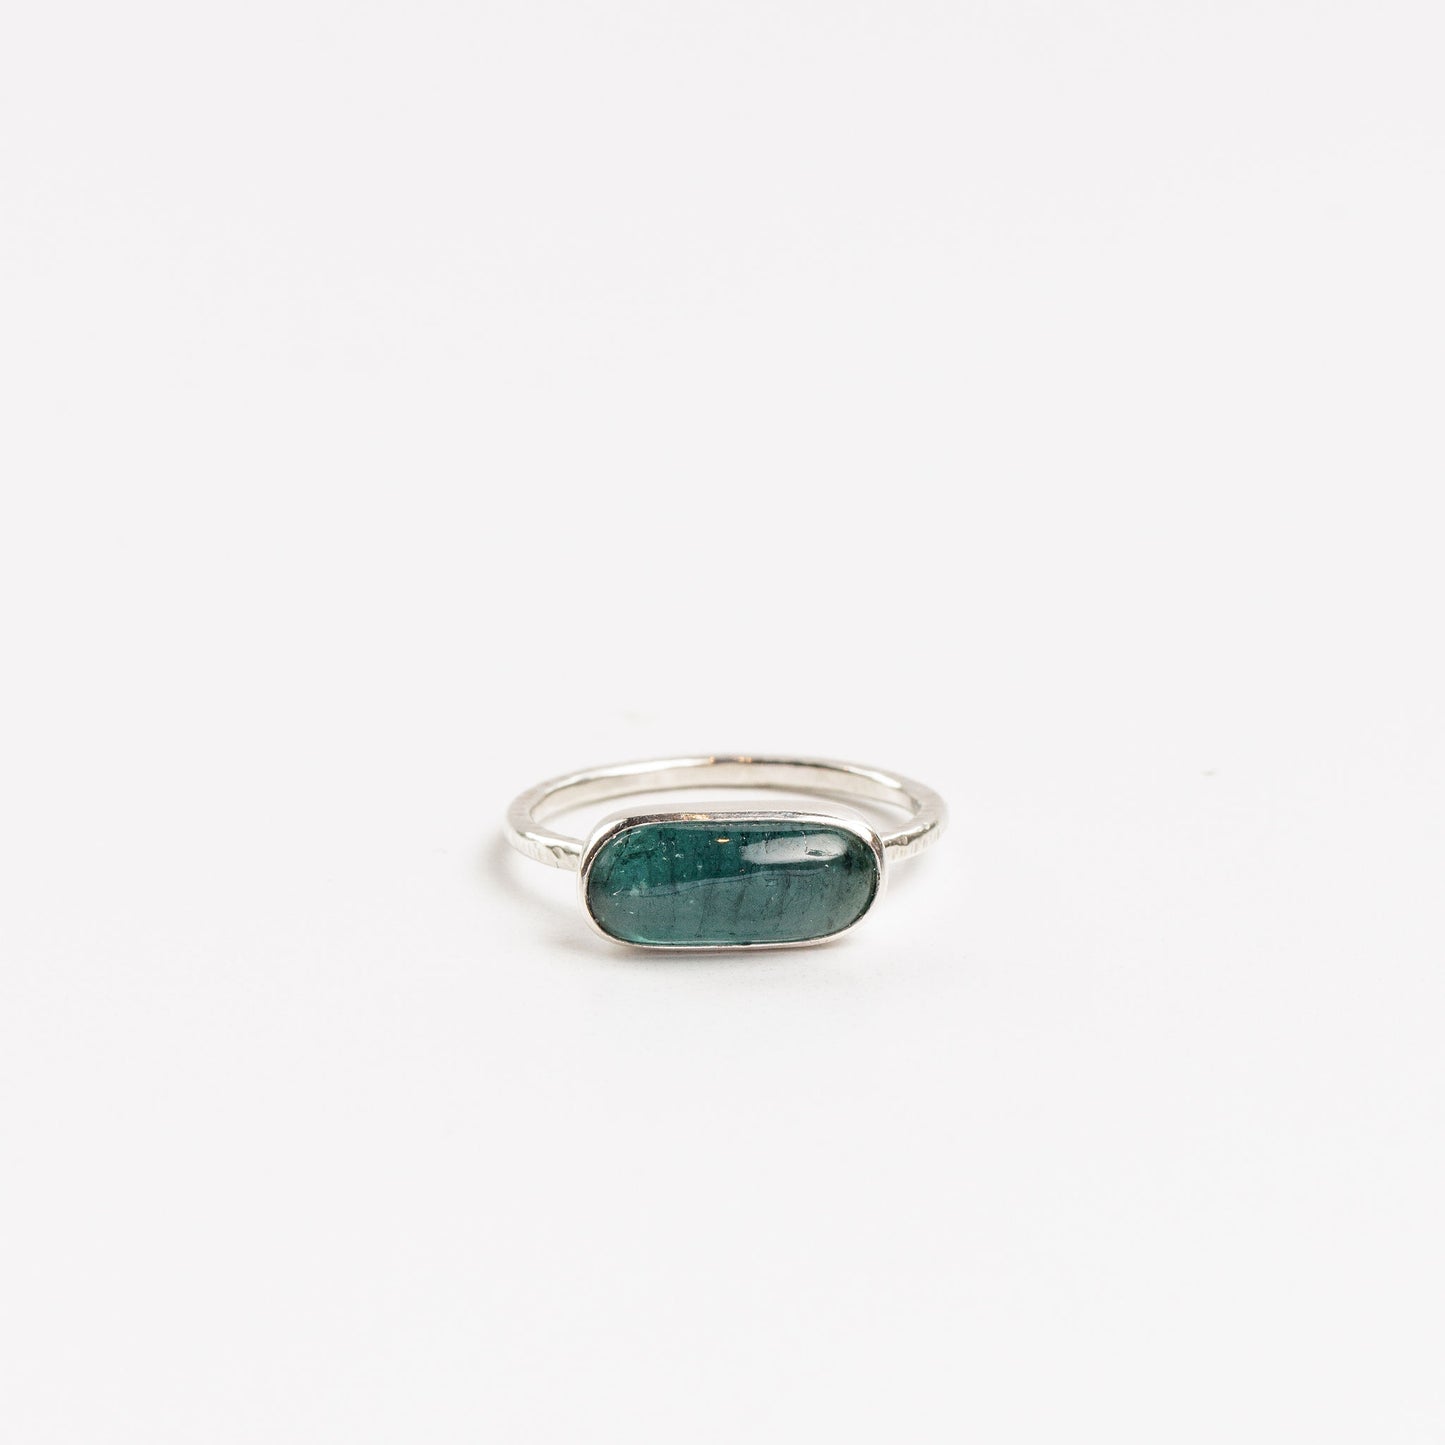 oval cabochon aquamarine bezel set in sterling silver ring on a white background